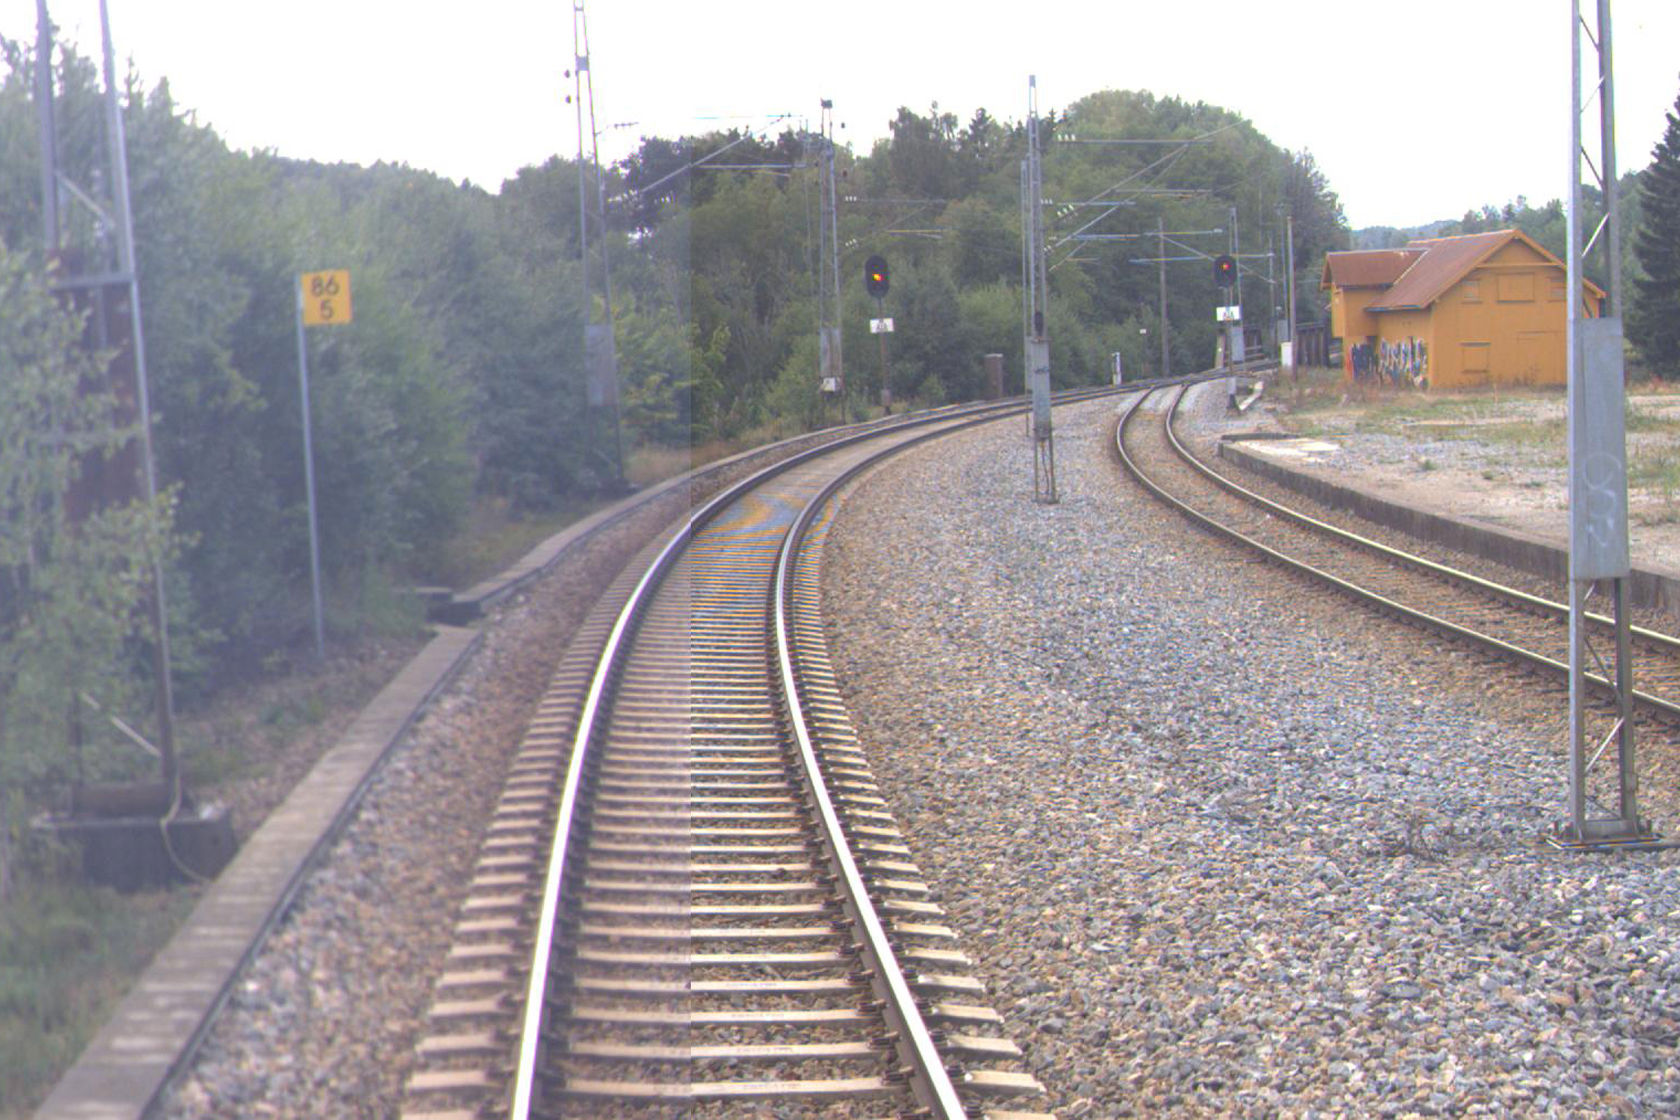 Tracks and buildings at Onsøy station